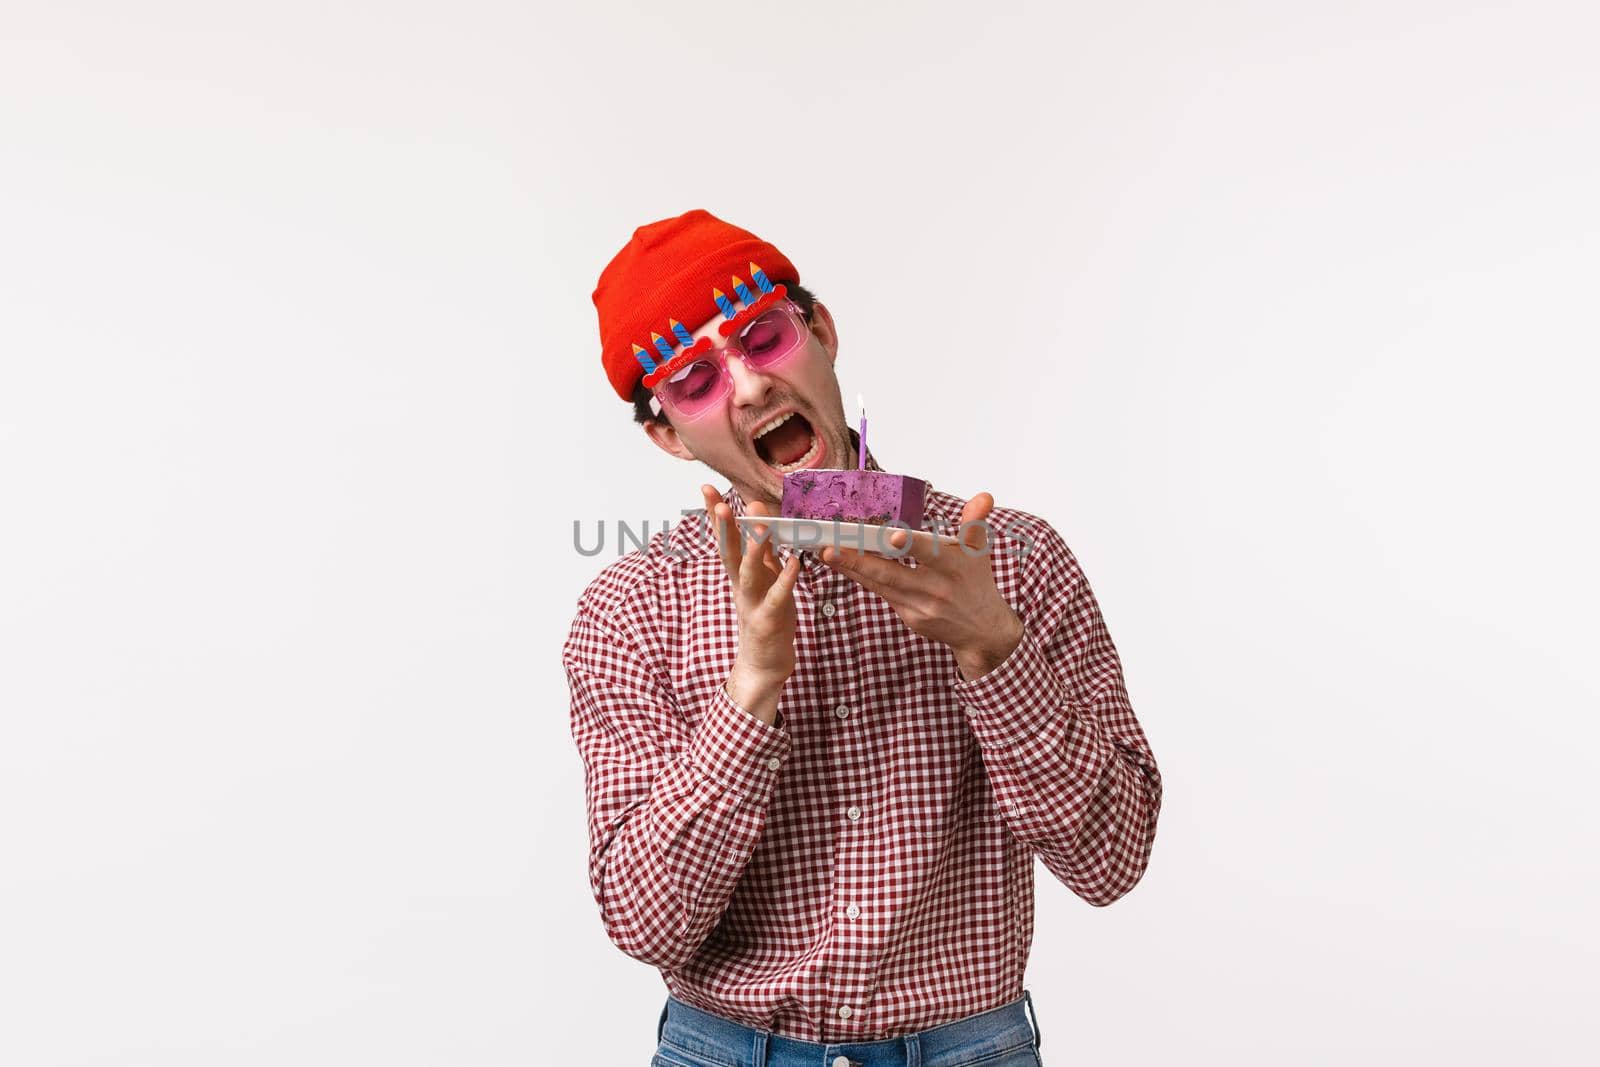 Celebration, holidays and lifestyle concept. Funny and cute adult hipster guy celebrating birthday, wear sunglasses and biting delicious b-day cake, eating tasty dessert, stand white background.